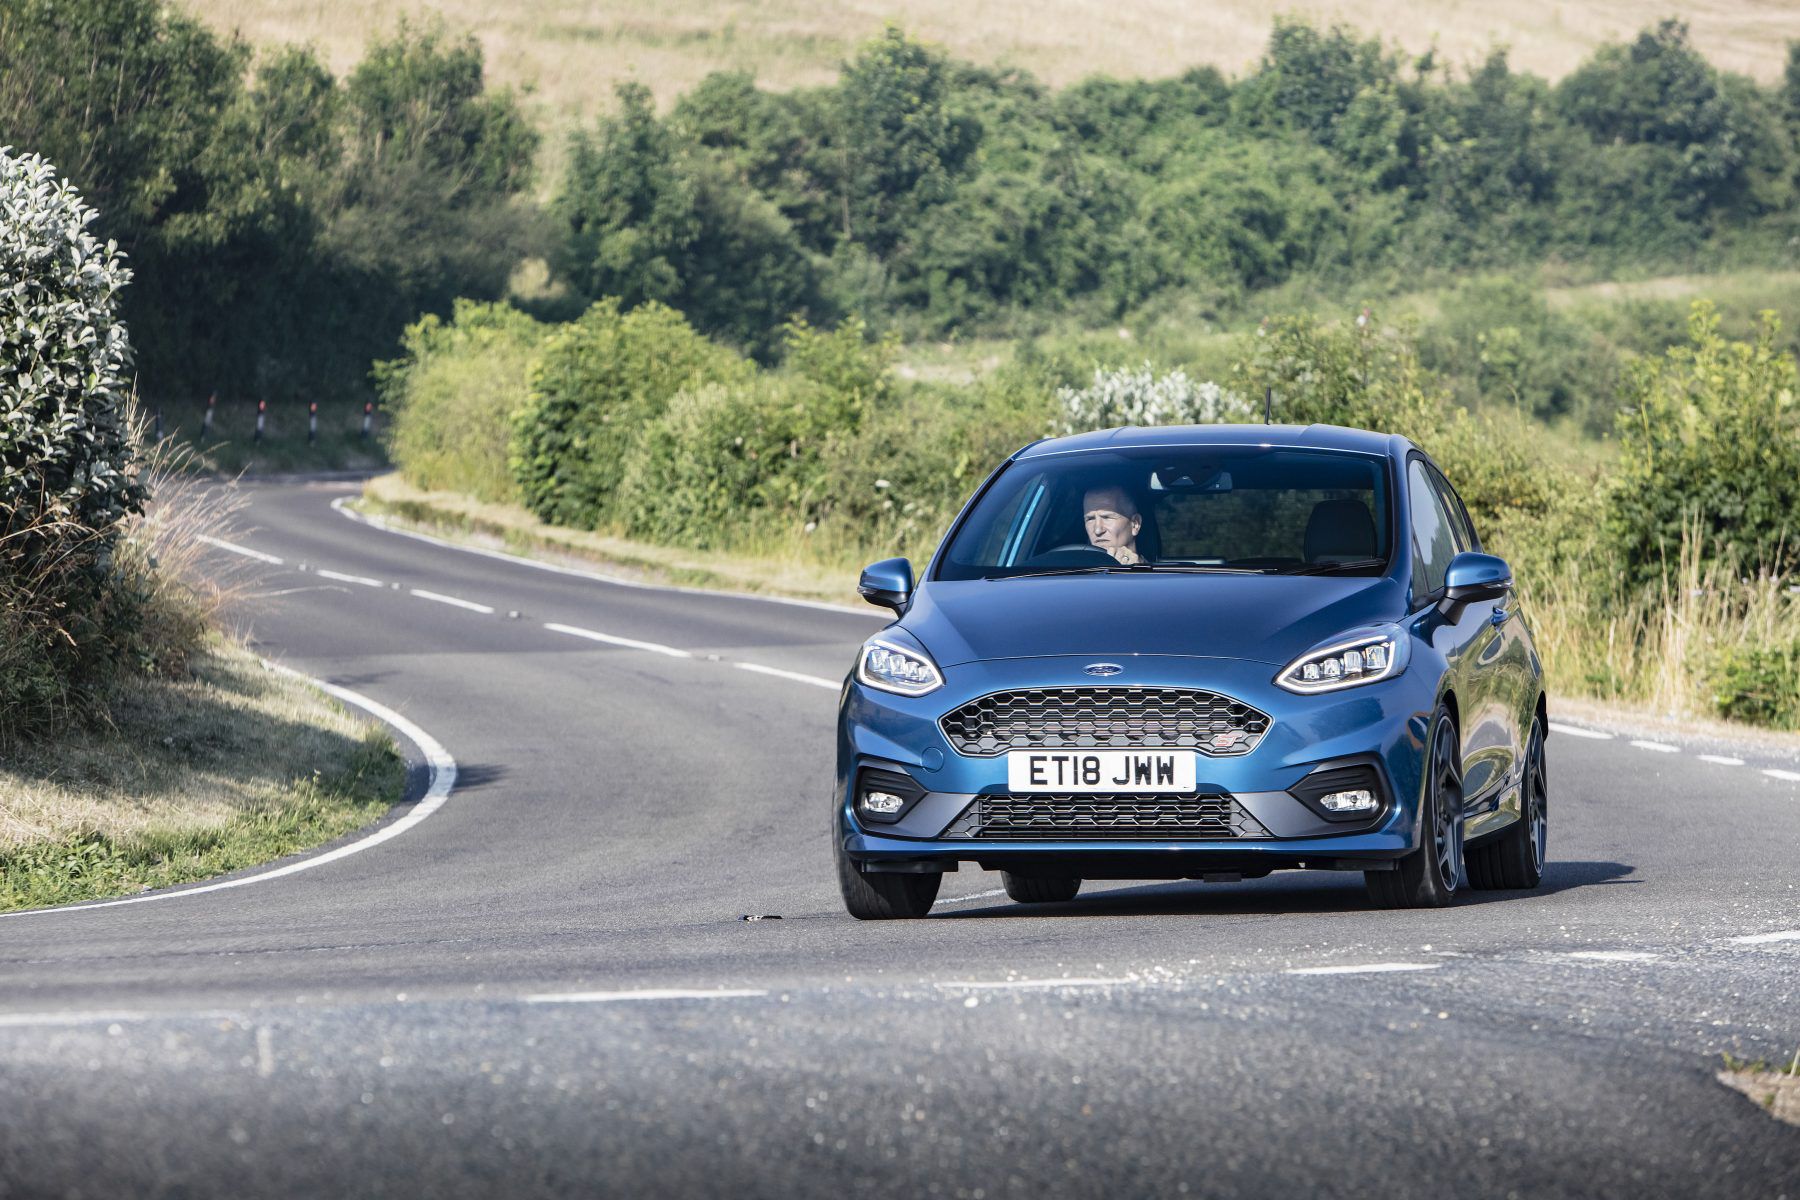 Front view of a blue Ford Fiesta ST driving down a road